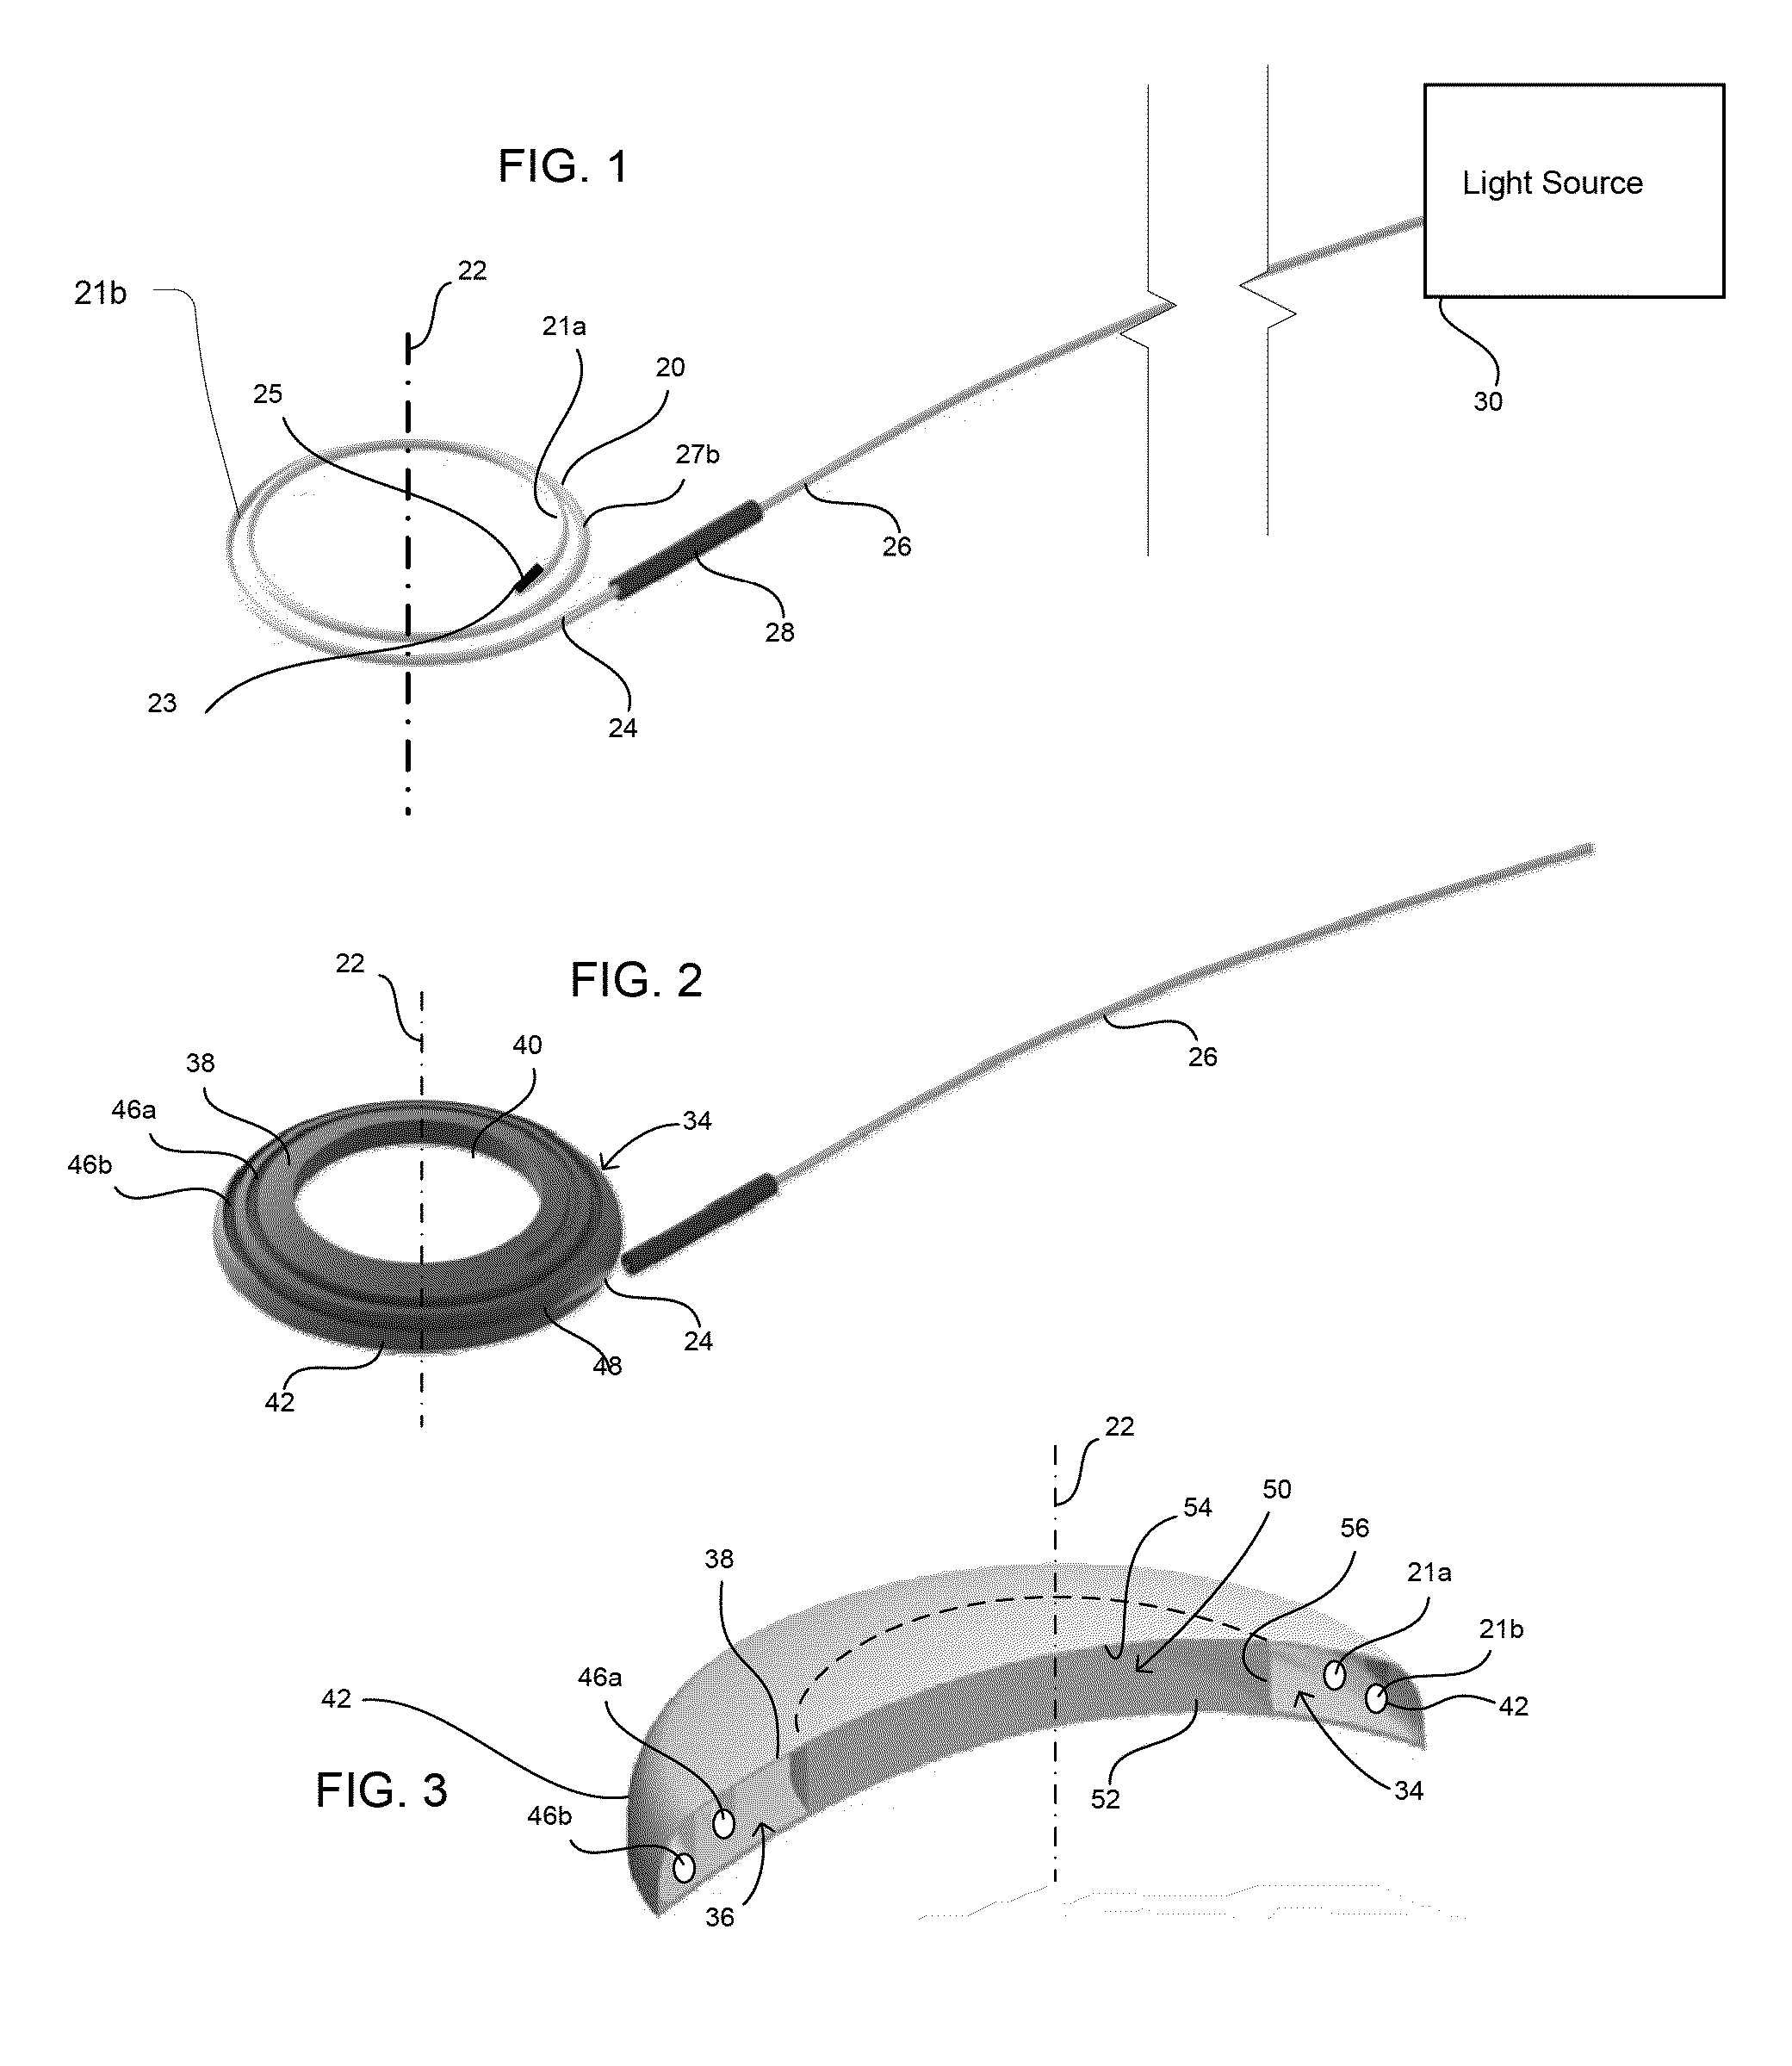 Apparatus for phototherapy of the eye